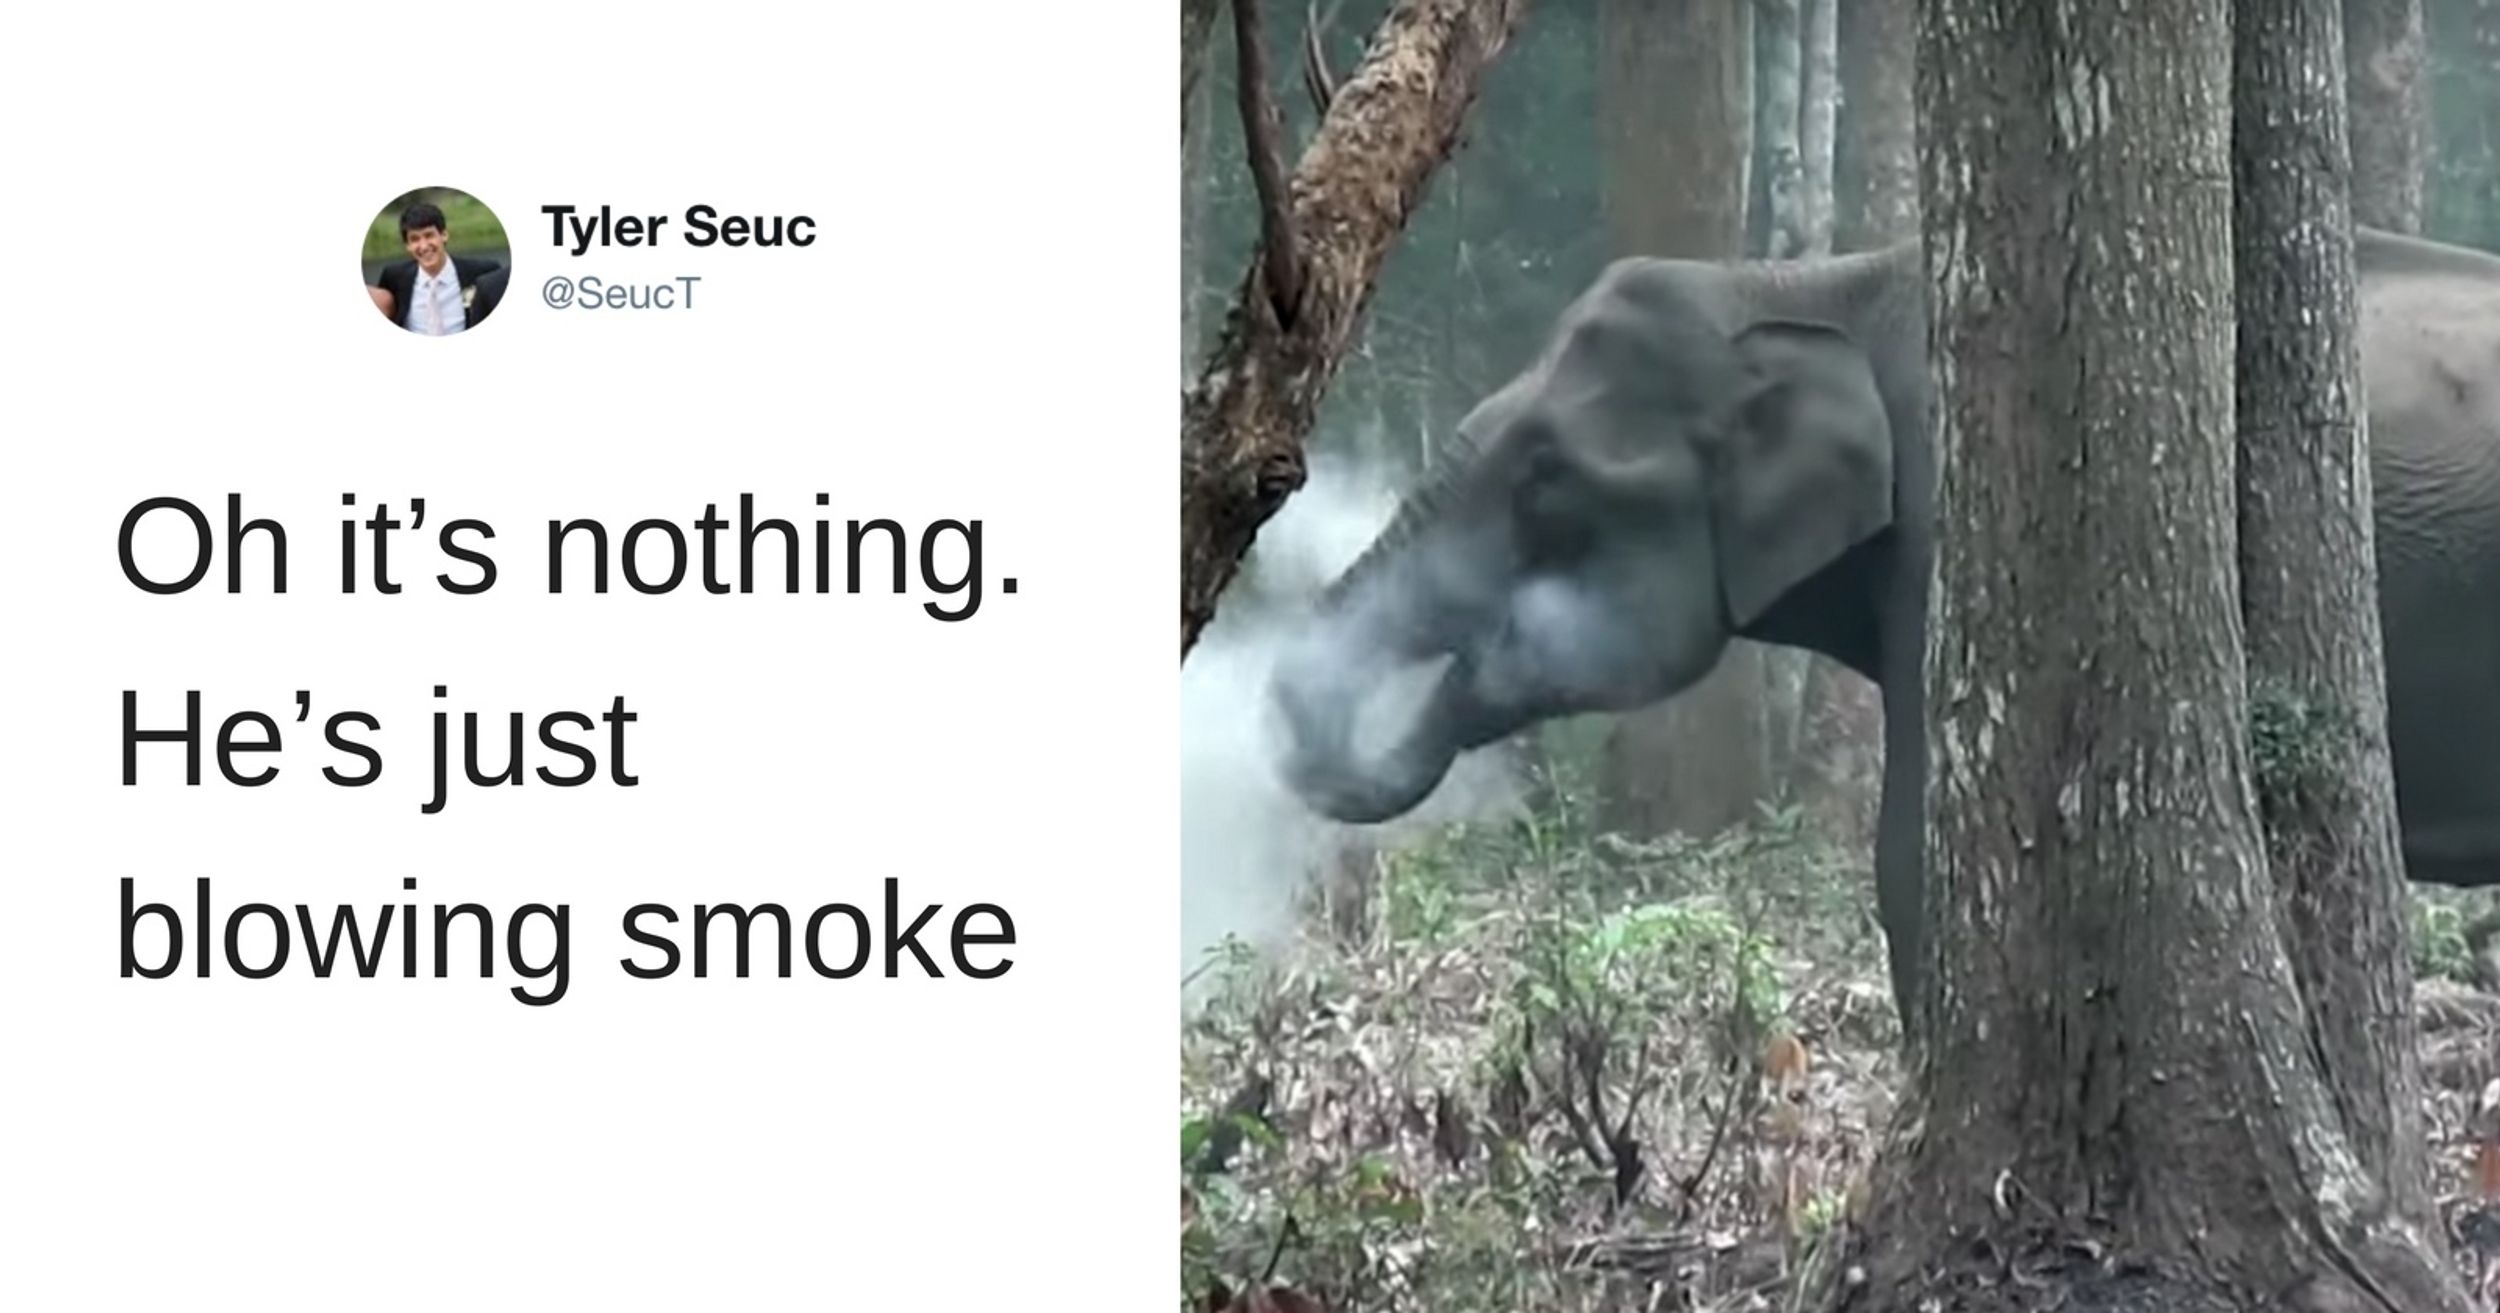 Video of Smoke-Breathing Elephant Has Scientists Asking a Bunch of Questions